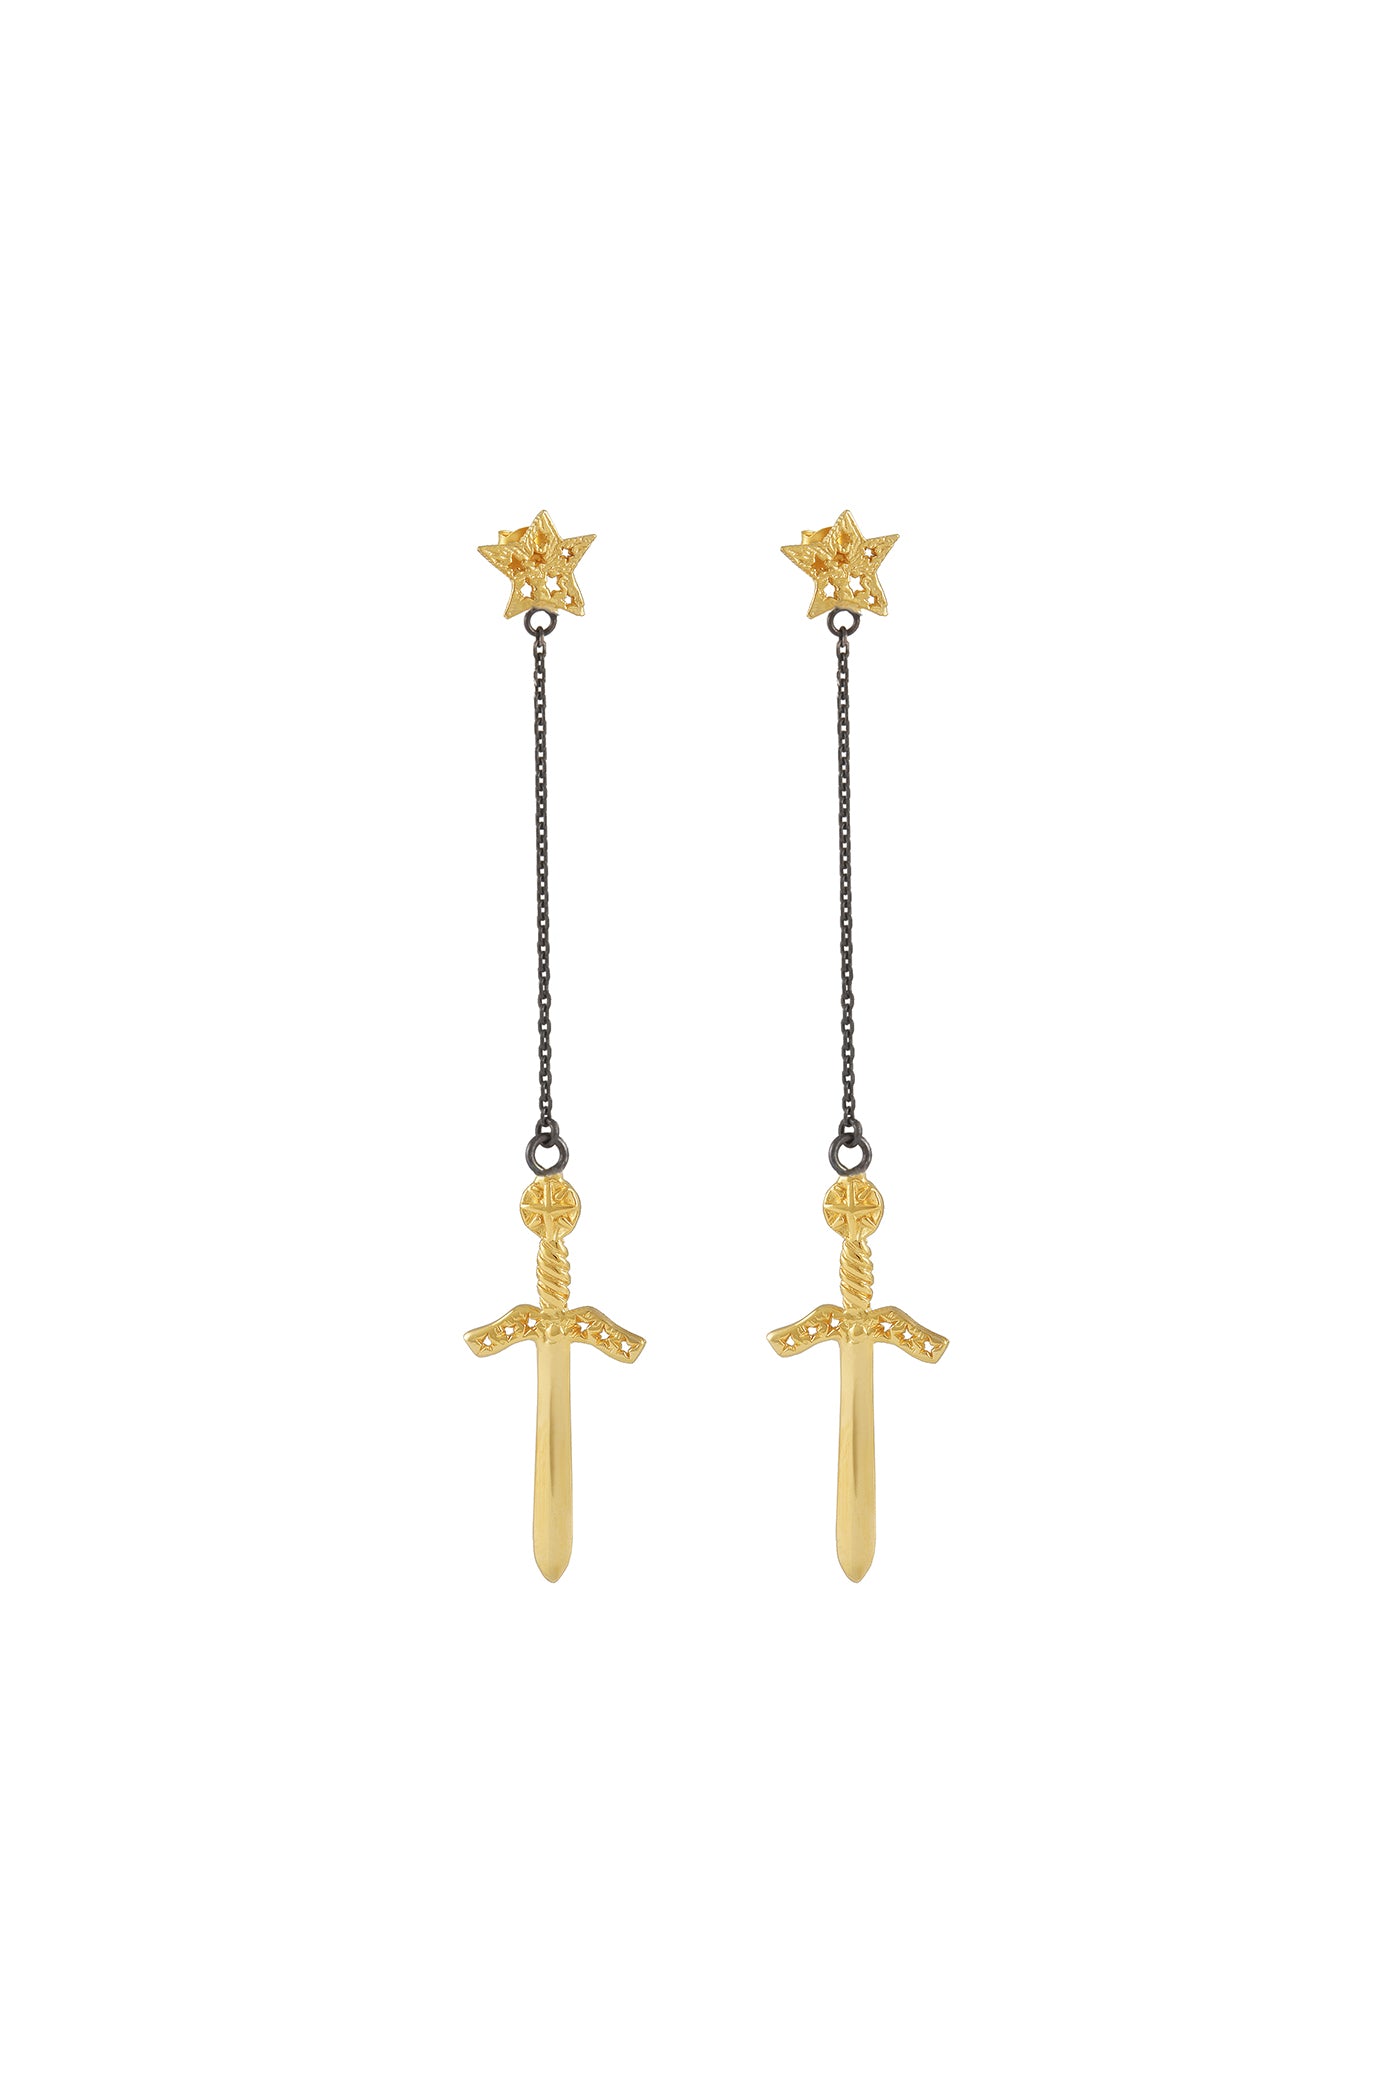 Magic knife star earrings  on the chain  8 cm. Silver, gold plated and oxide